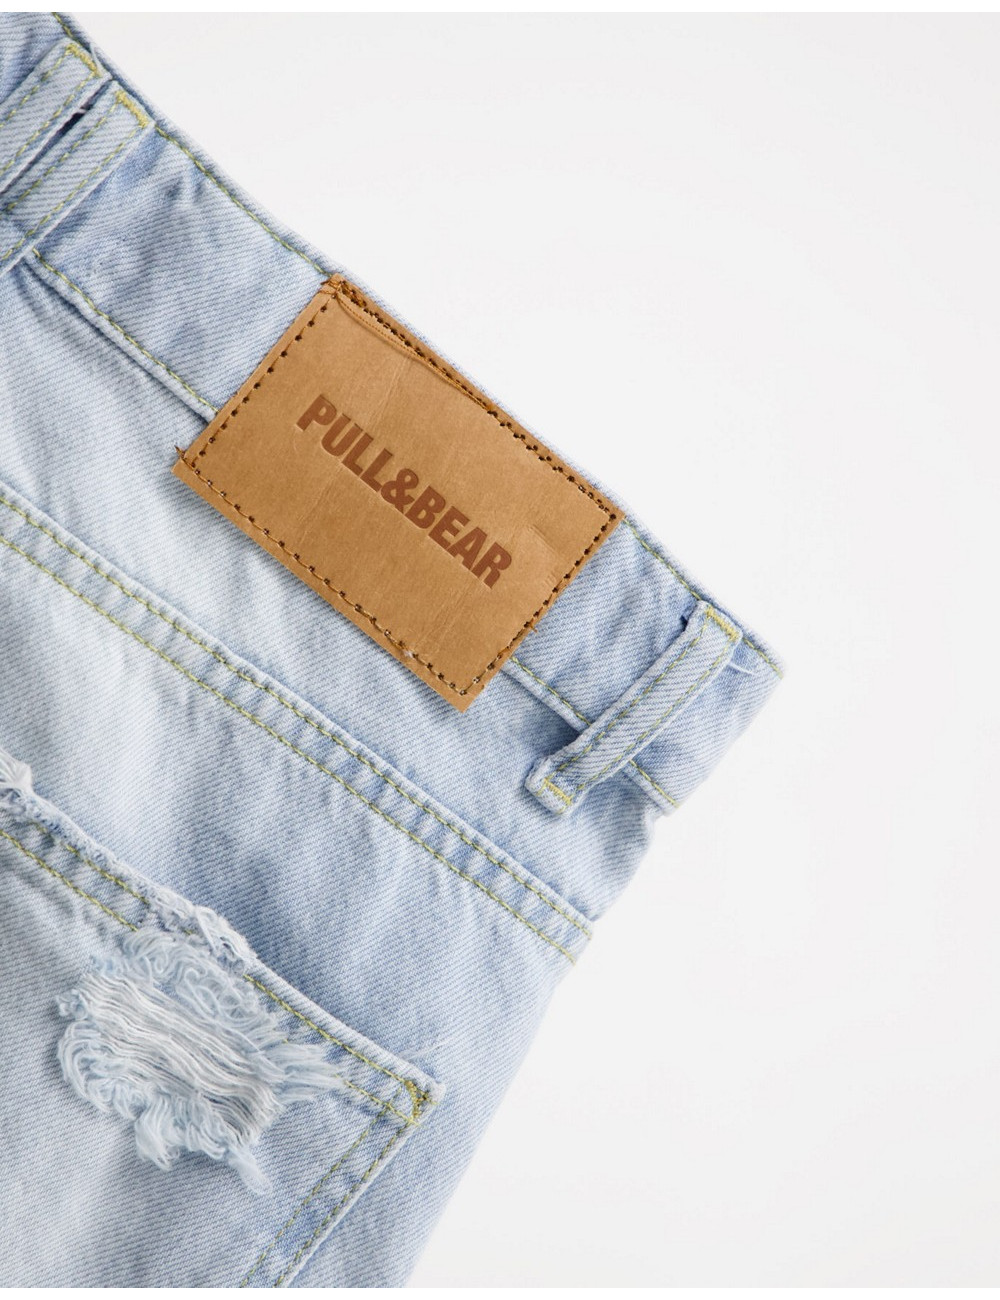 Pull&Bear relaxed jeans...